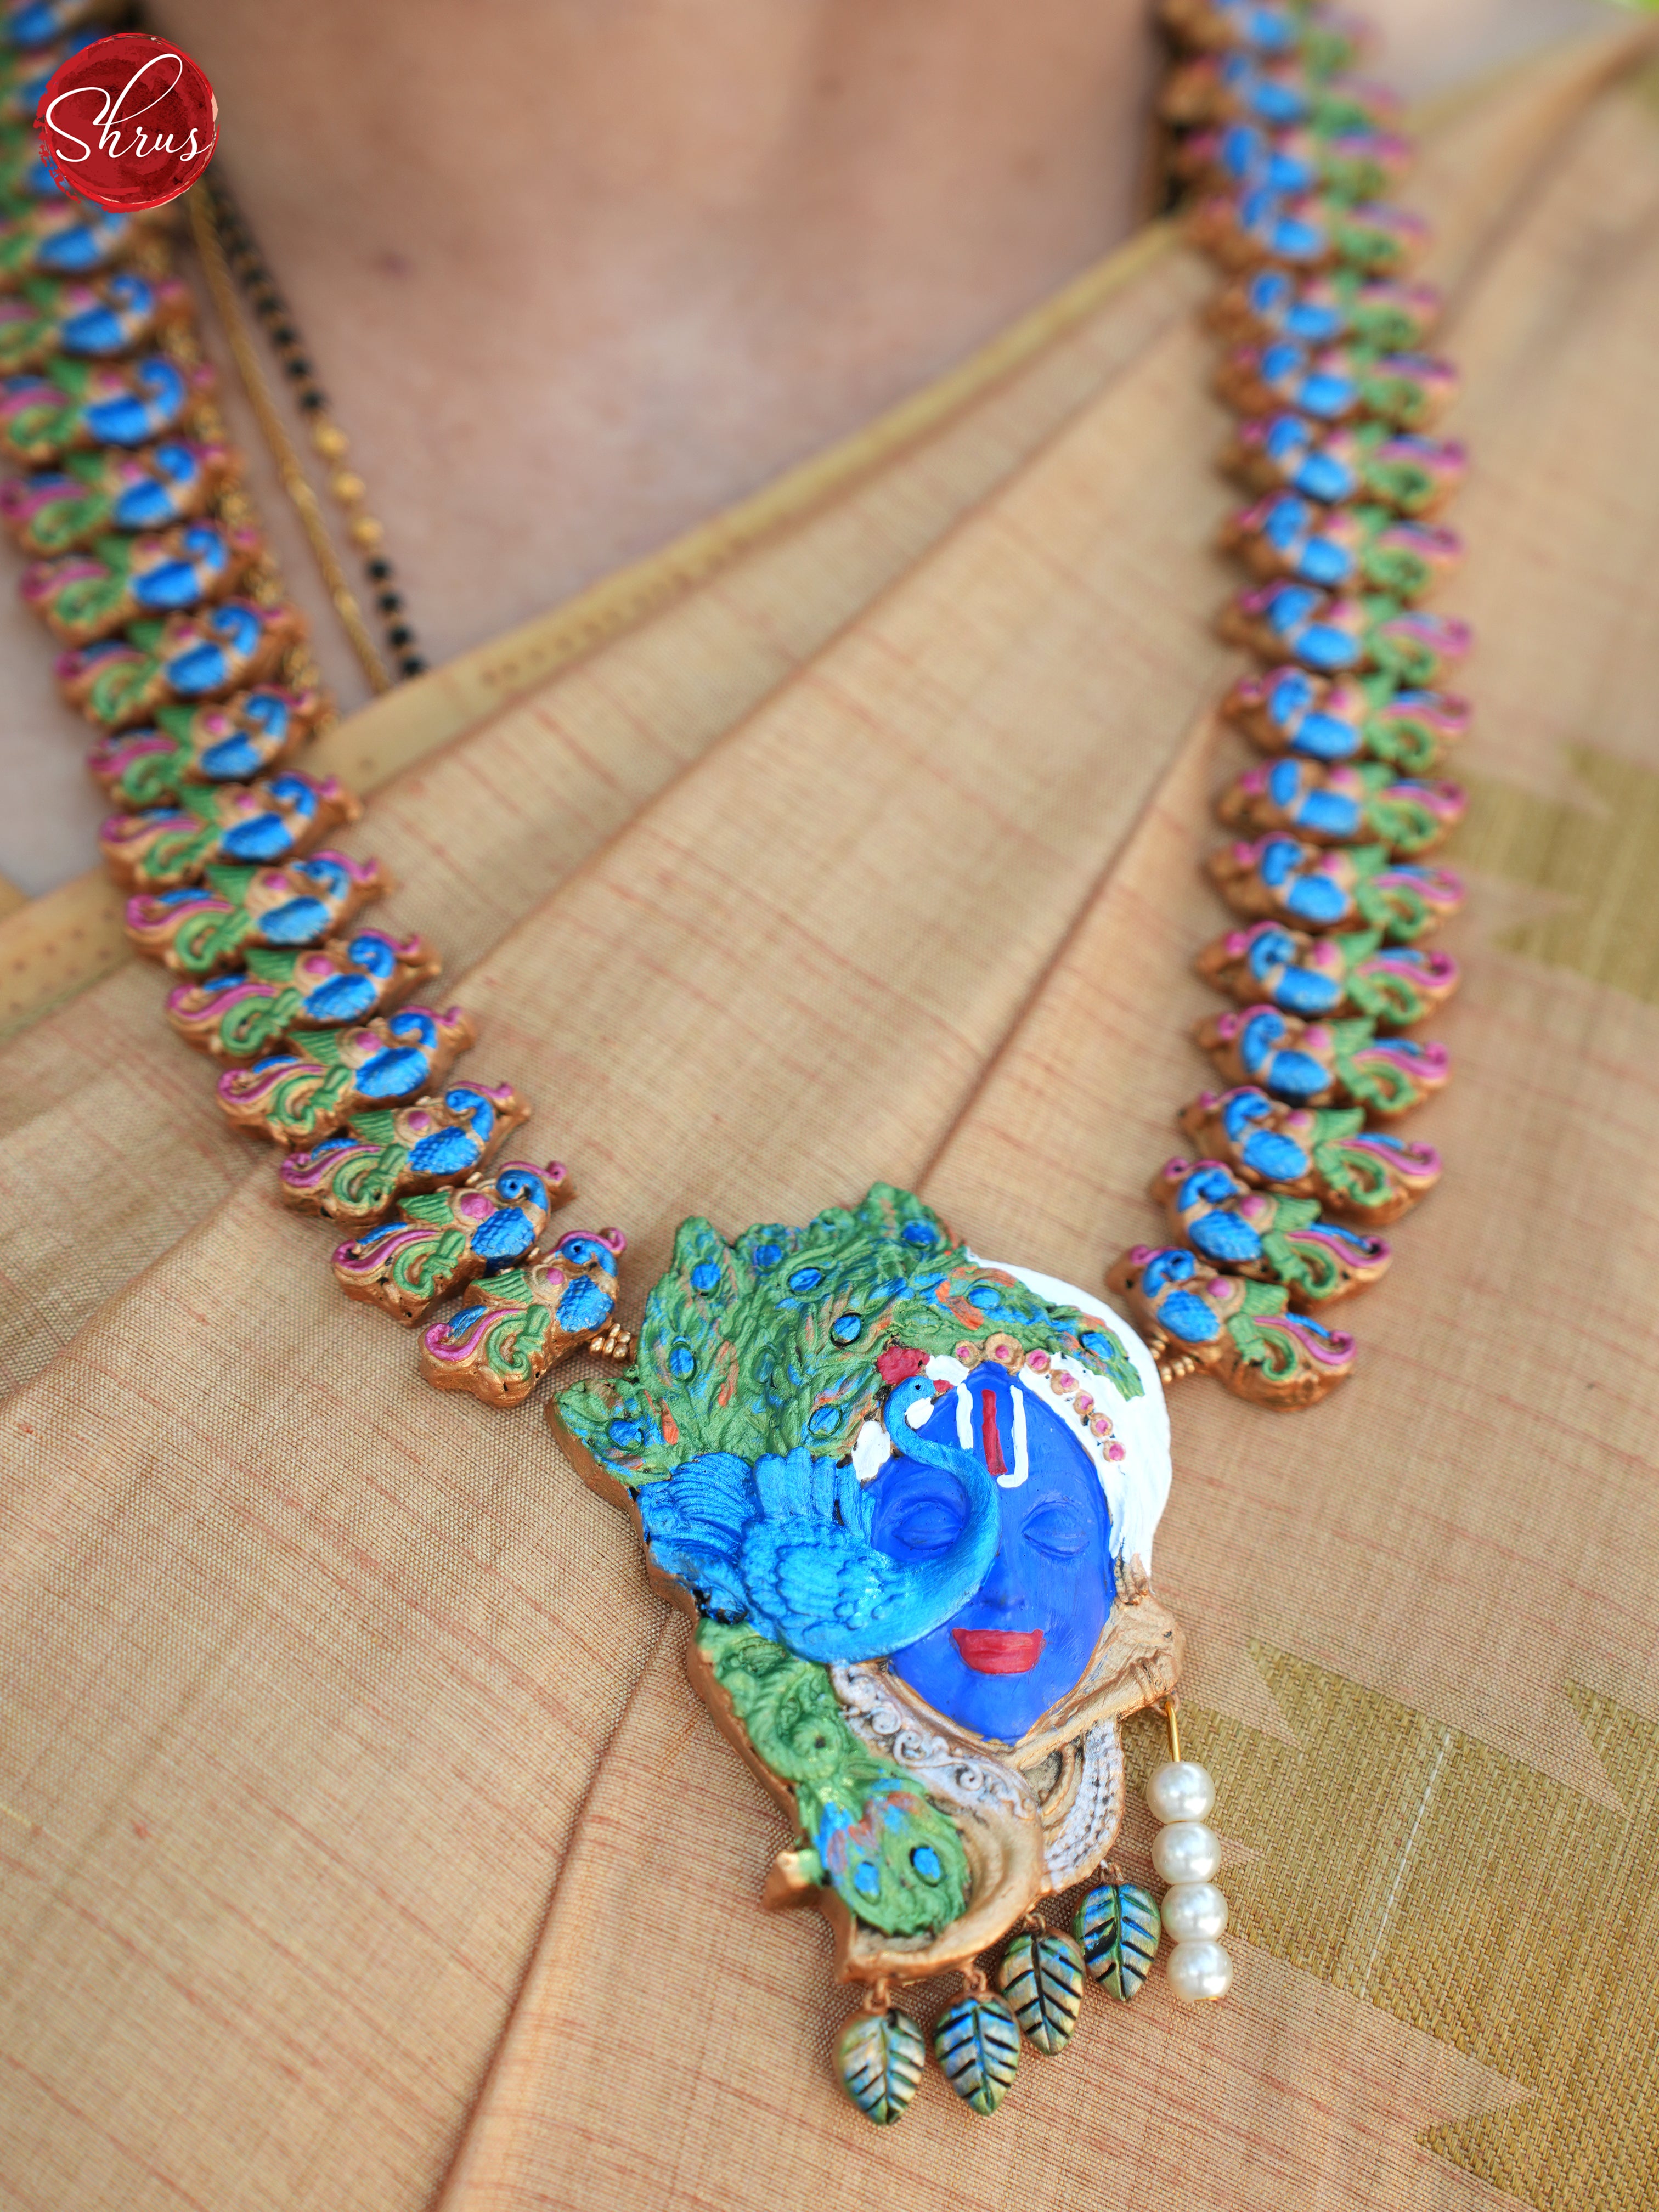 lord krishna , peacock terracotta necklace with  jhumkas  - NECK PIECE & EARRINGS - Shop on ShrusEternity.com